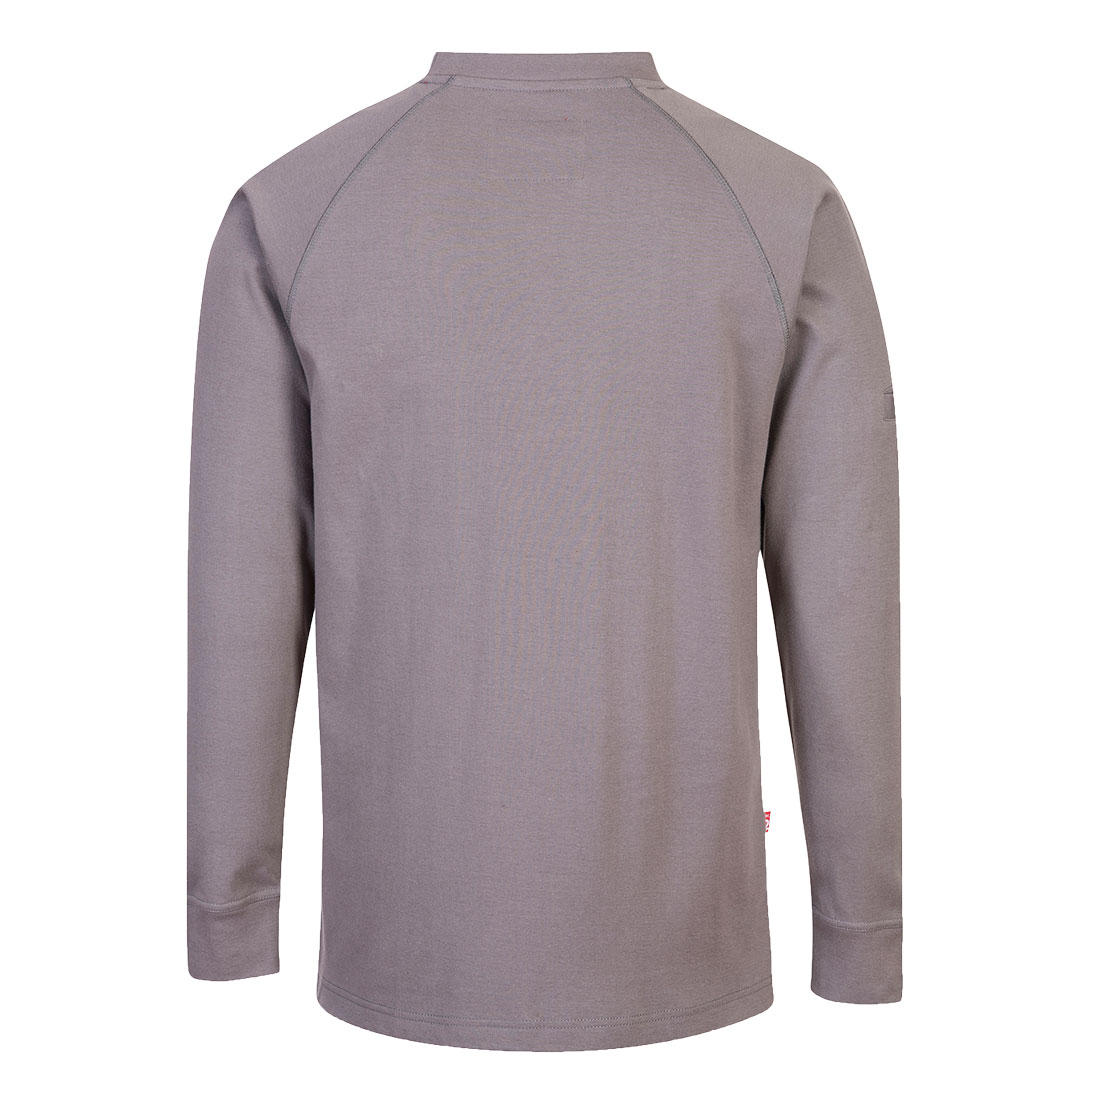 Flame Resistant Anti-Static Comforable Cool Crew Neck